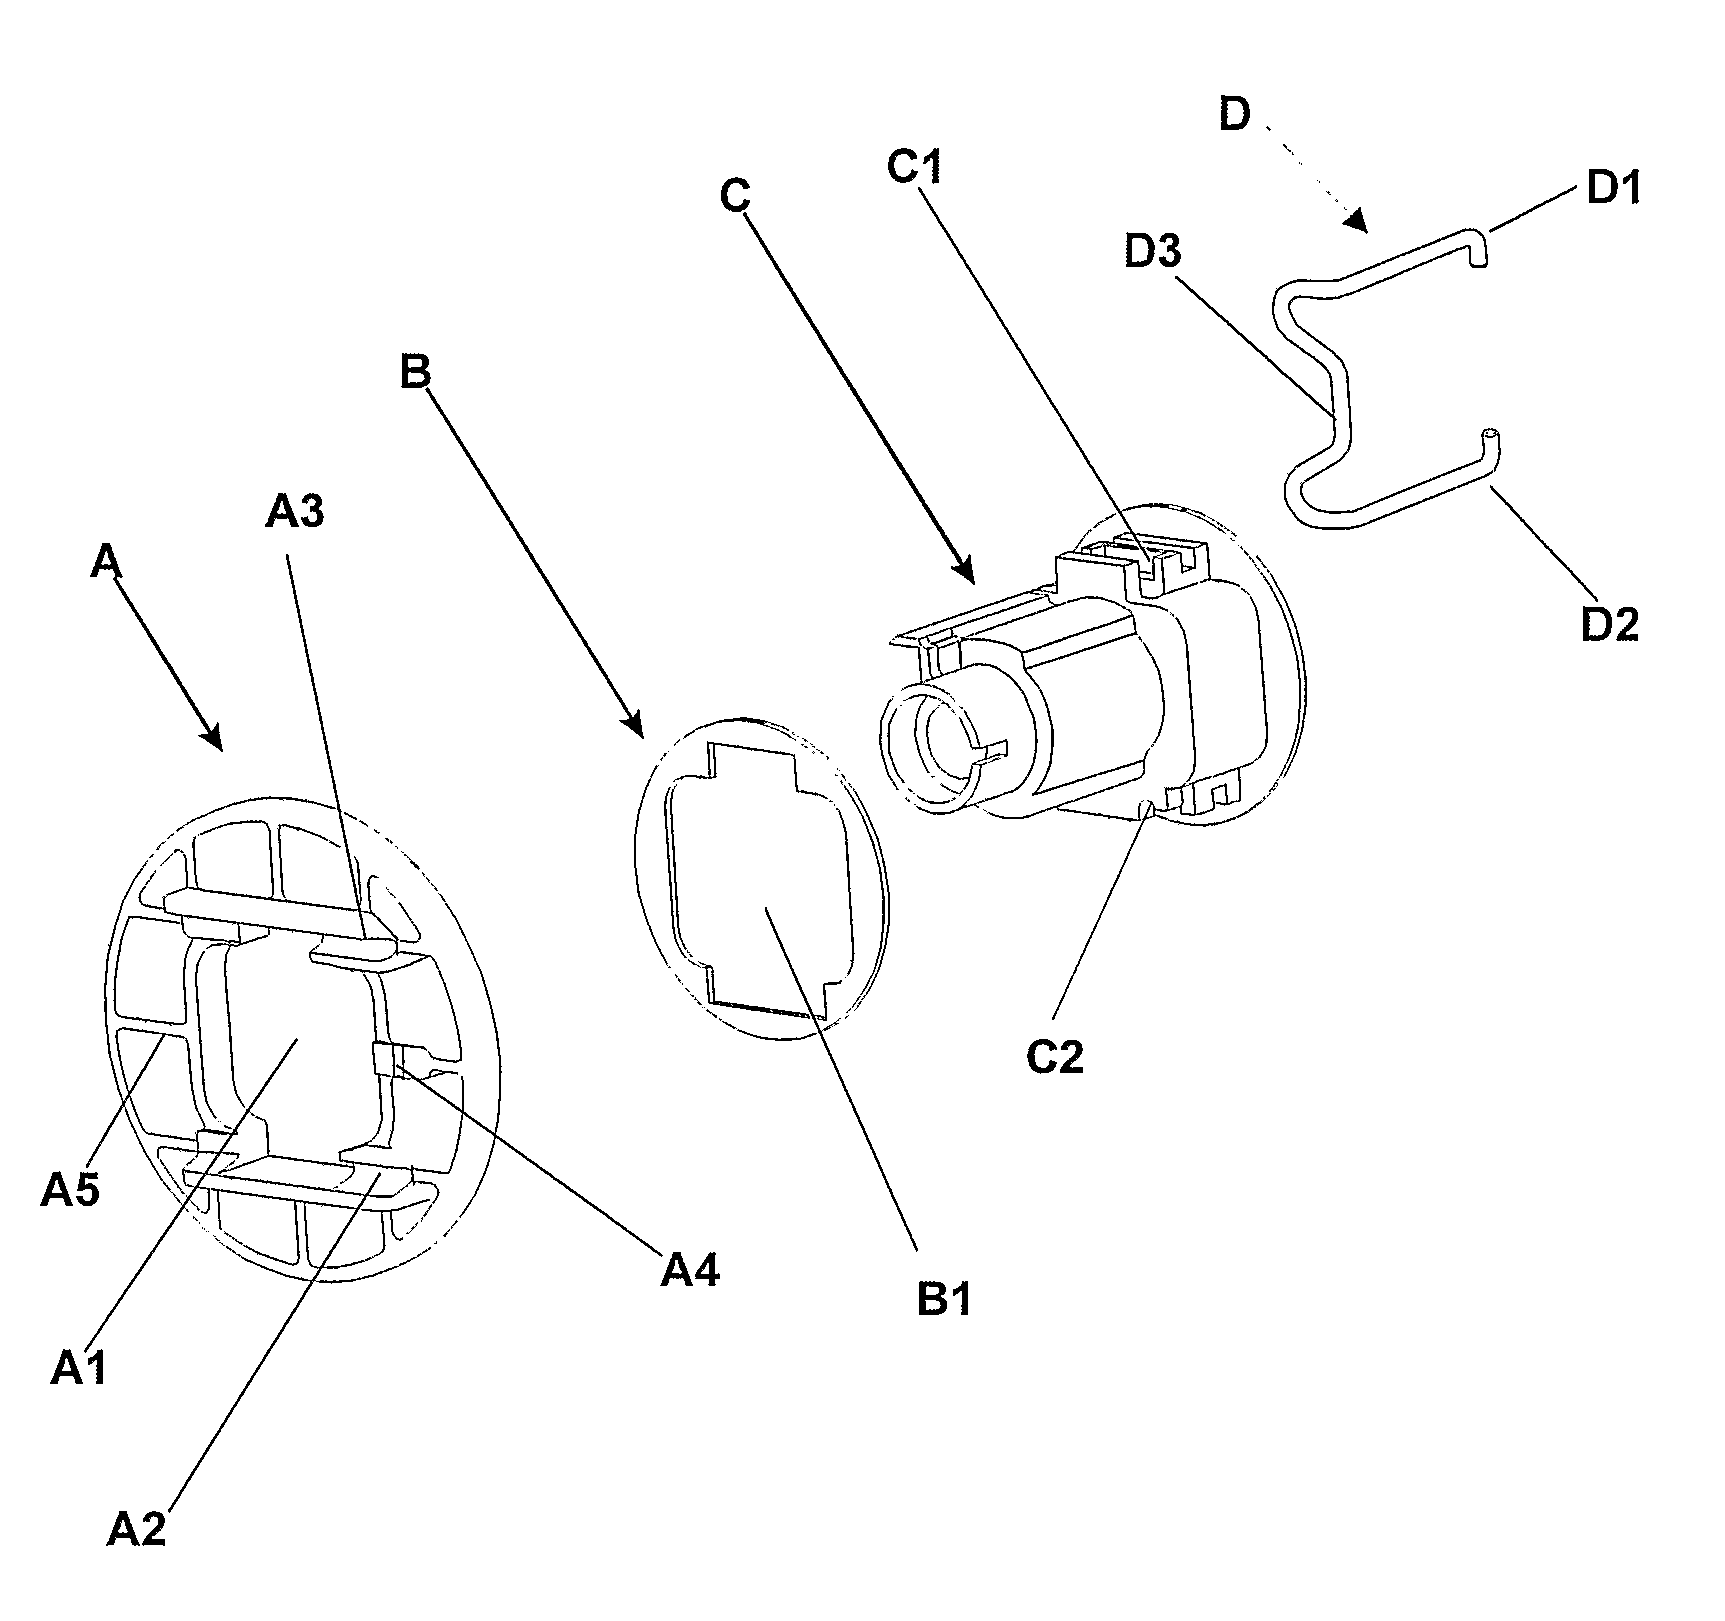 Constructive improvement to an anti-theft lock device applied to automobile trunks